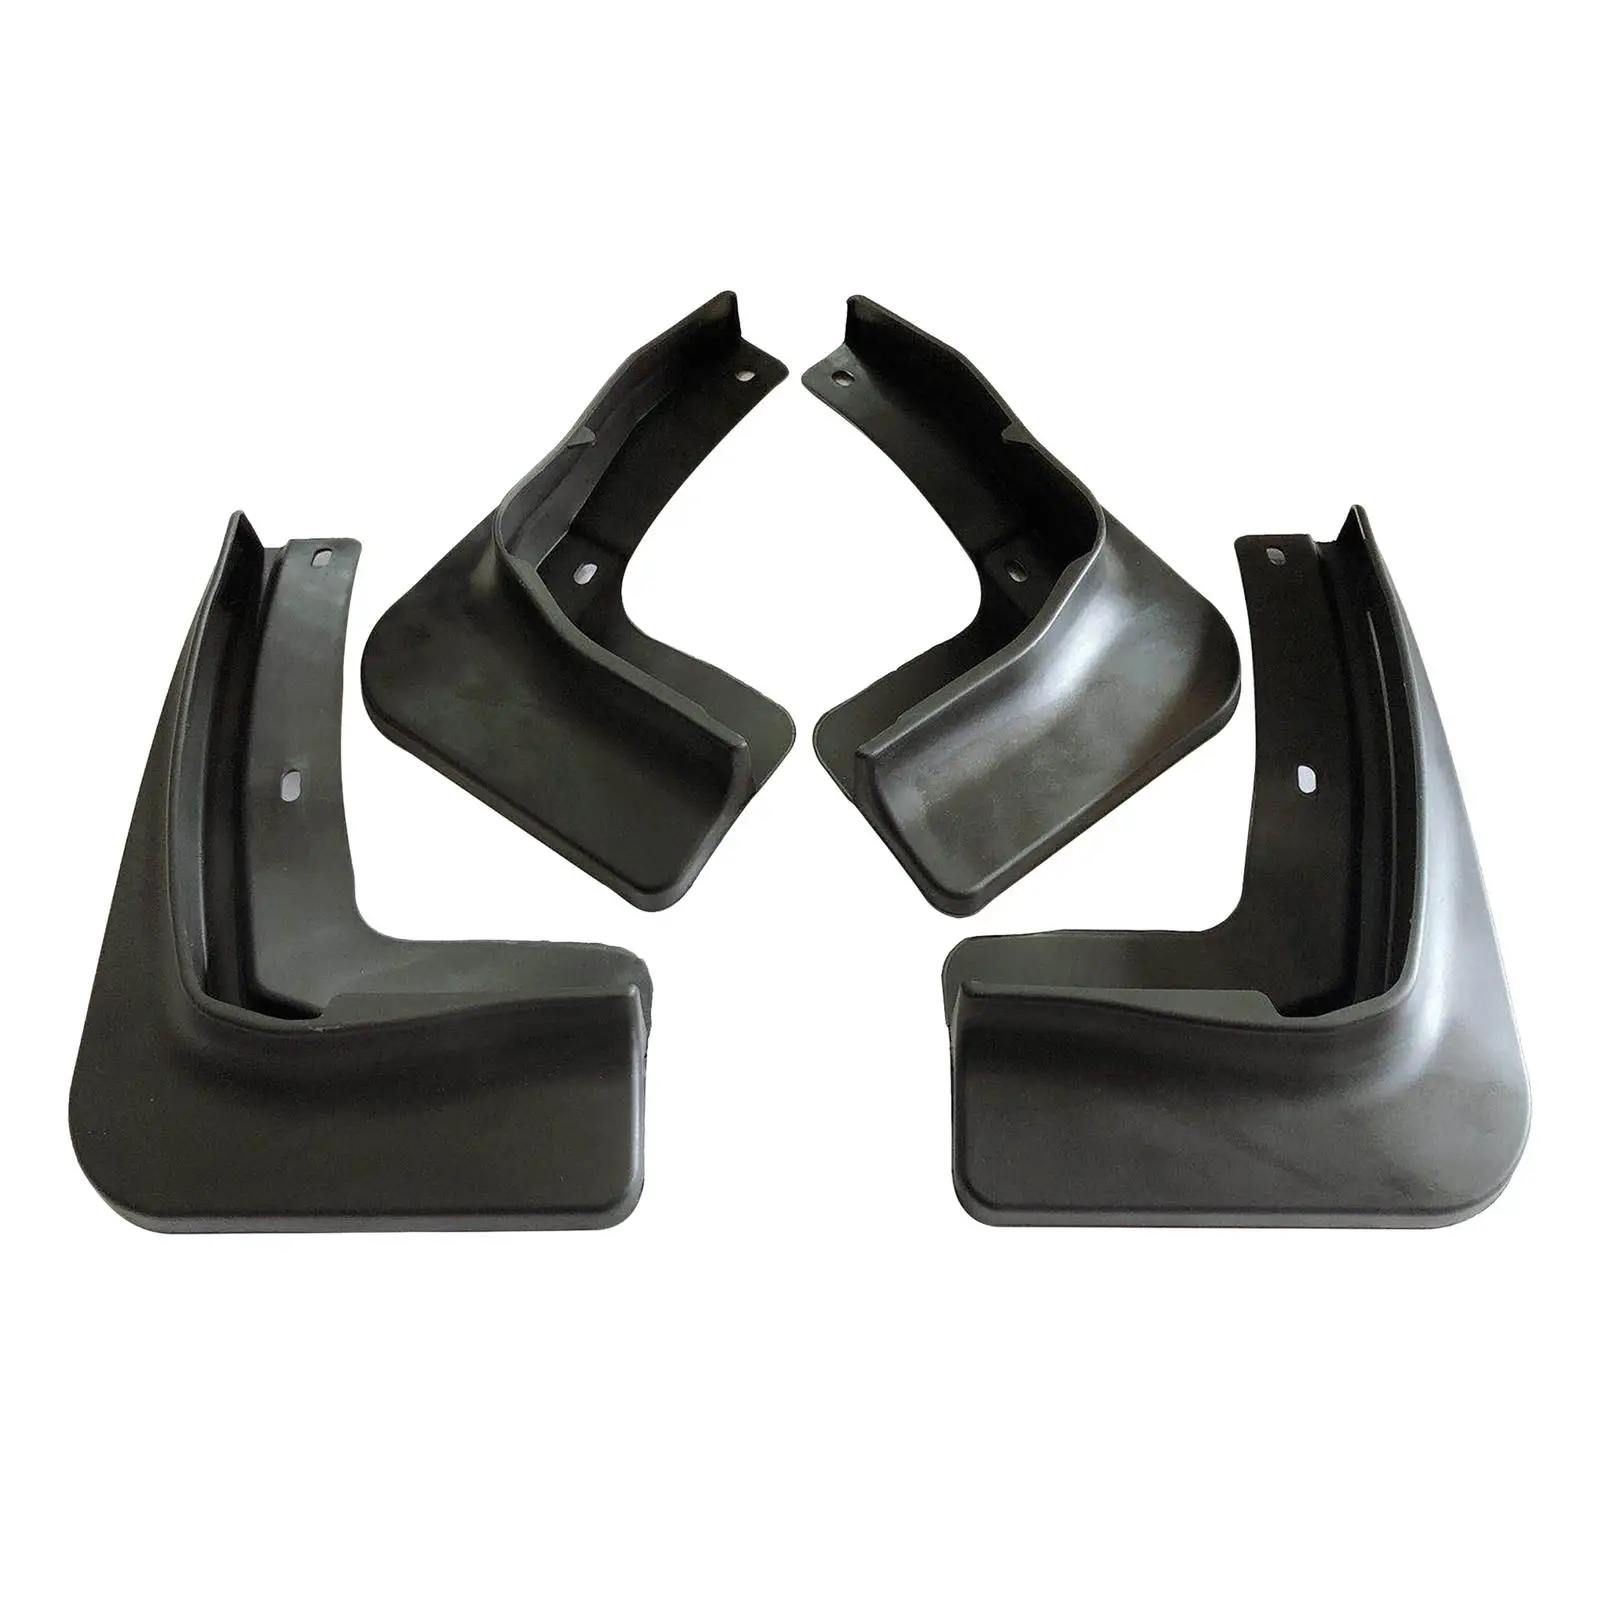 4 Pieces Car Mudguard Muds Guard Flap Accessories for Byd Yuan Plus